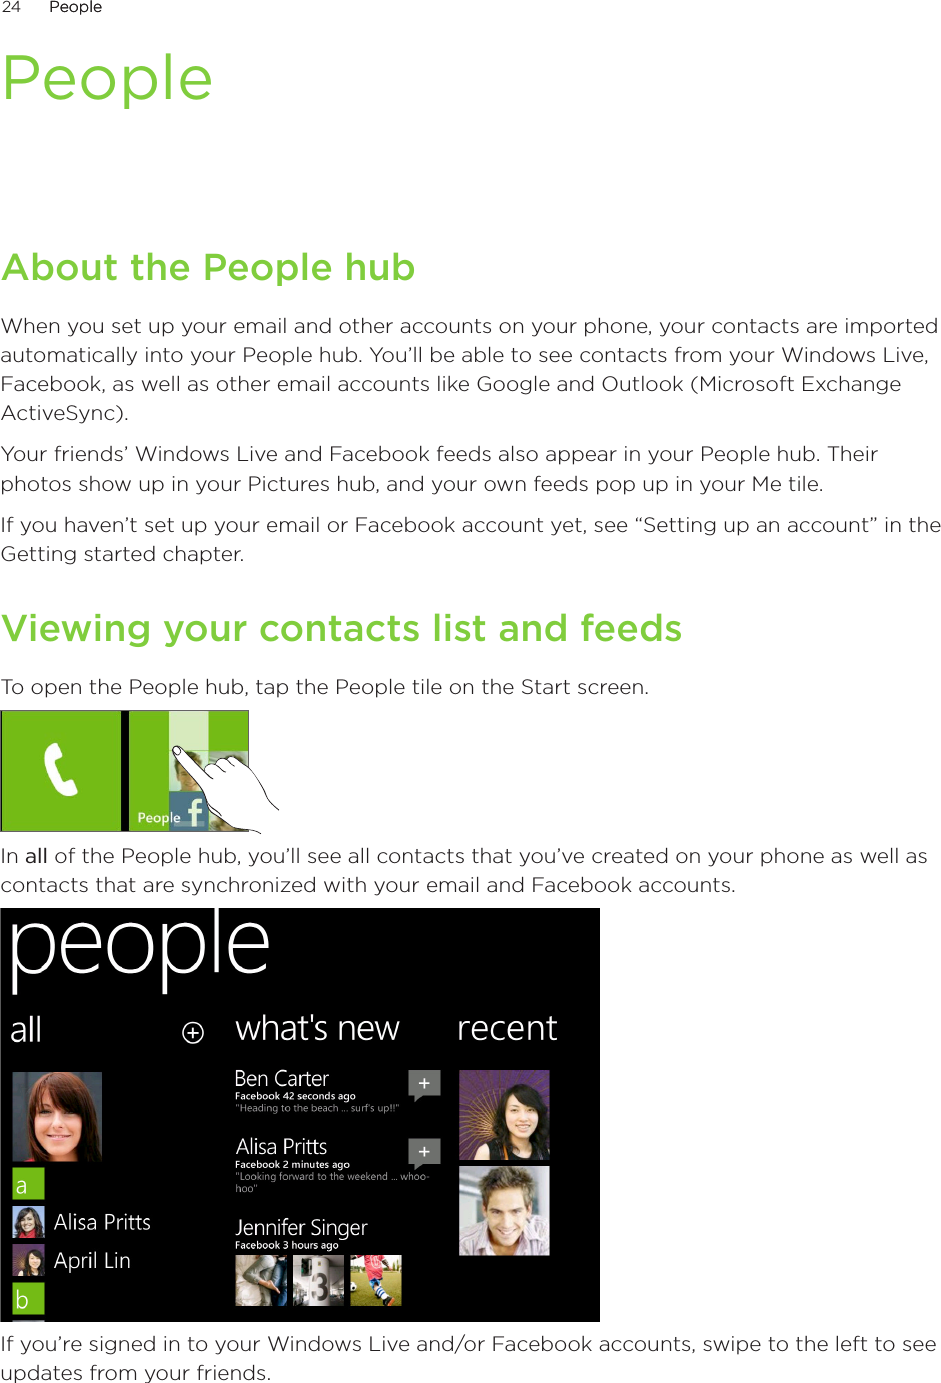 24      PeoplePeople      PeopleAbout the People hubWhen you set up your email and other accounts on your phone, your contacts are imported automatically into your People hub. You’ll be able to see contacts from your Windows Live, Facebook, as well as other email accounts like Google and Outlook (Microsoft Exchange ActiveSync).Your friends’ Windows Live and Facebook feeds also appear in your People hub. Their photos show up in your Pictures hub, and your own feeds pop up in your Me tile.If you haven’t set up your email or Facebook account yet, see “Setting up an account” in the Getting started chapter.Viewing your contacts list and feedsTo open the People hub, tap the People tile on the Start screen.In all of the People hub, you’ll see all contacts that you’ve created on your phone as well as contacts that are synchronized with your email and Facebook accounts.If you’re signed in to your Windows Live and/or Facebook accounts, swipe to the left to see updates from your friends.